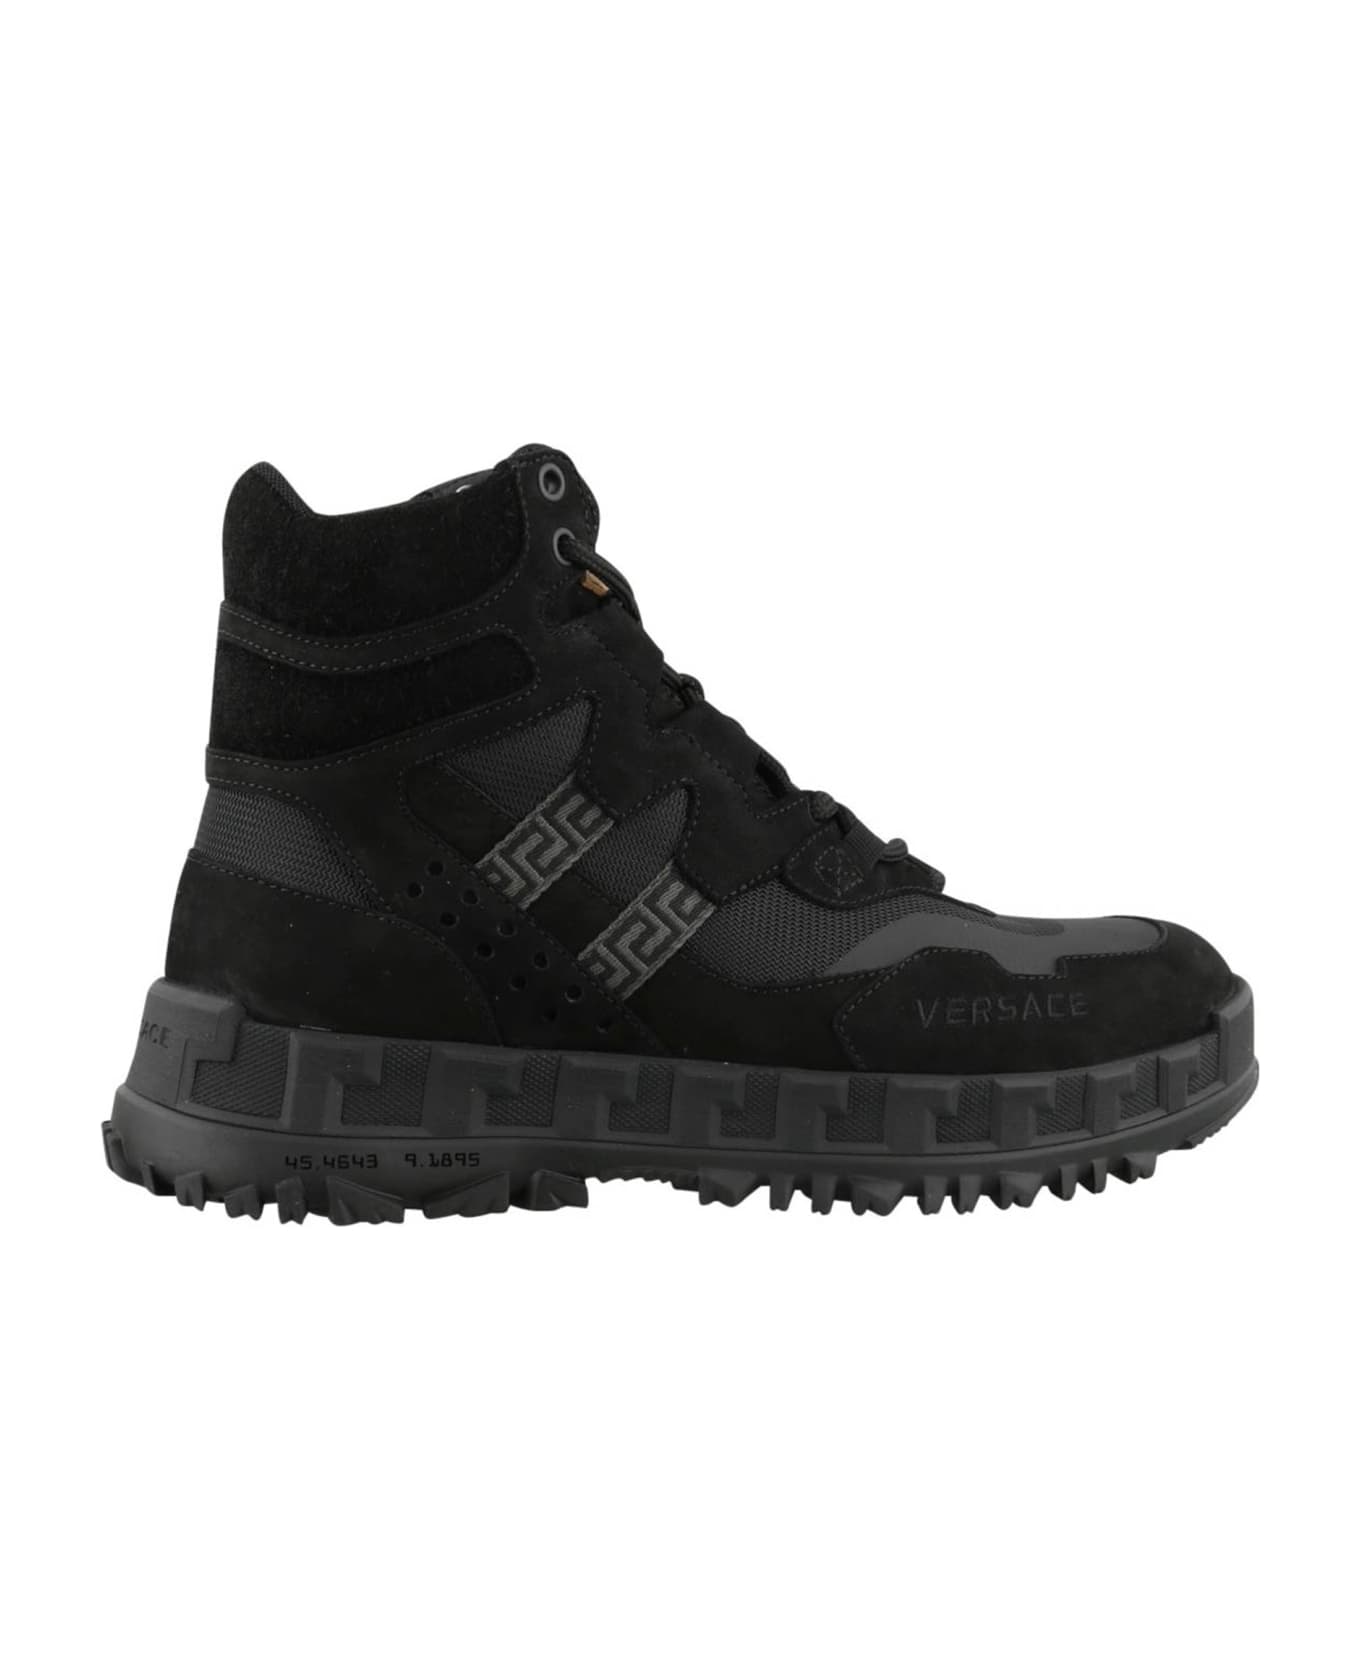 Versace Suede Hiking Boots - Black